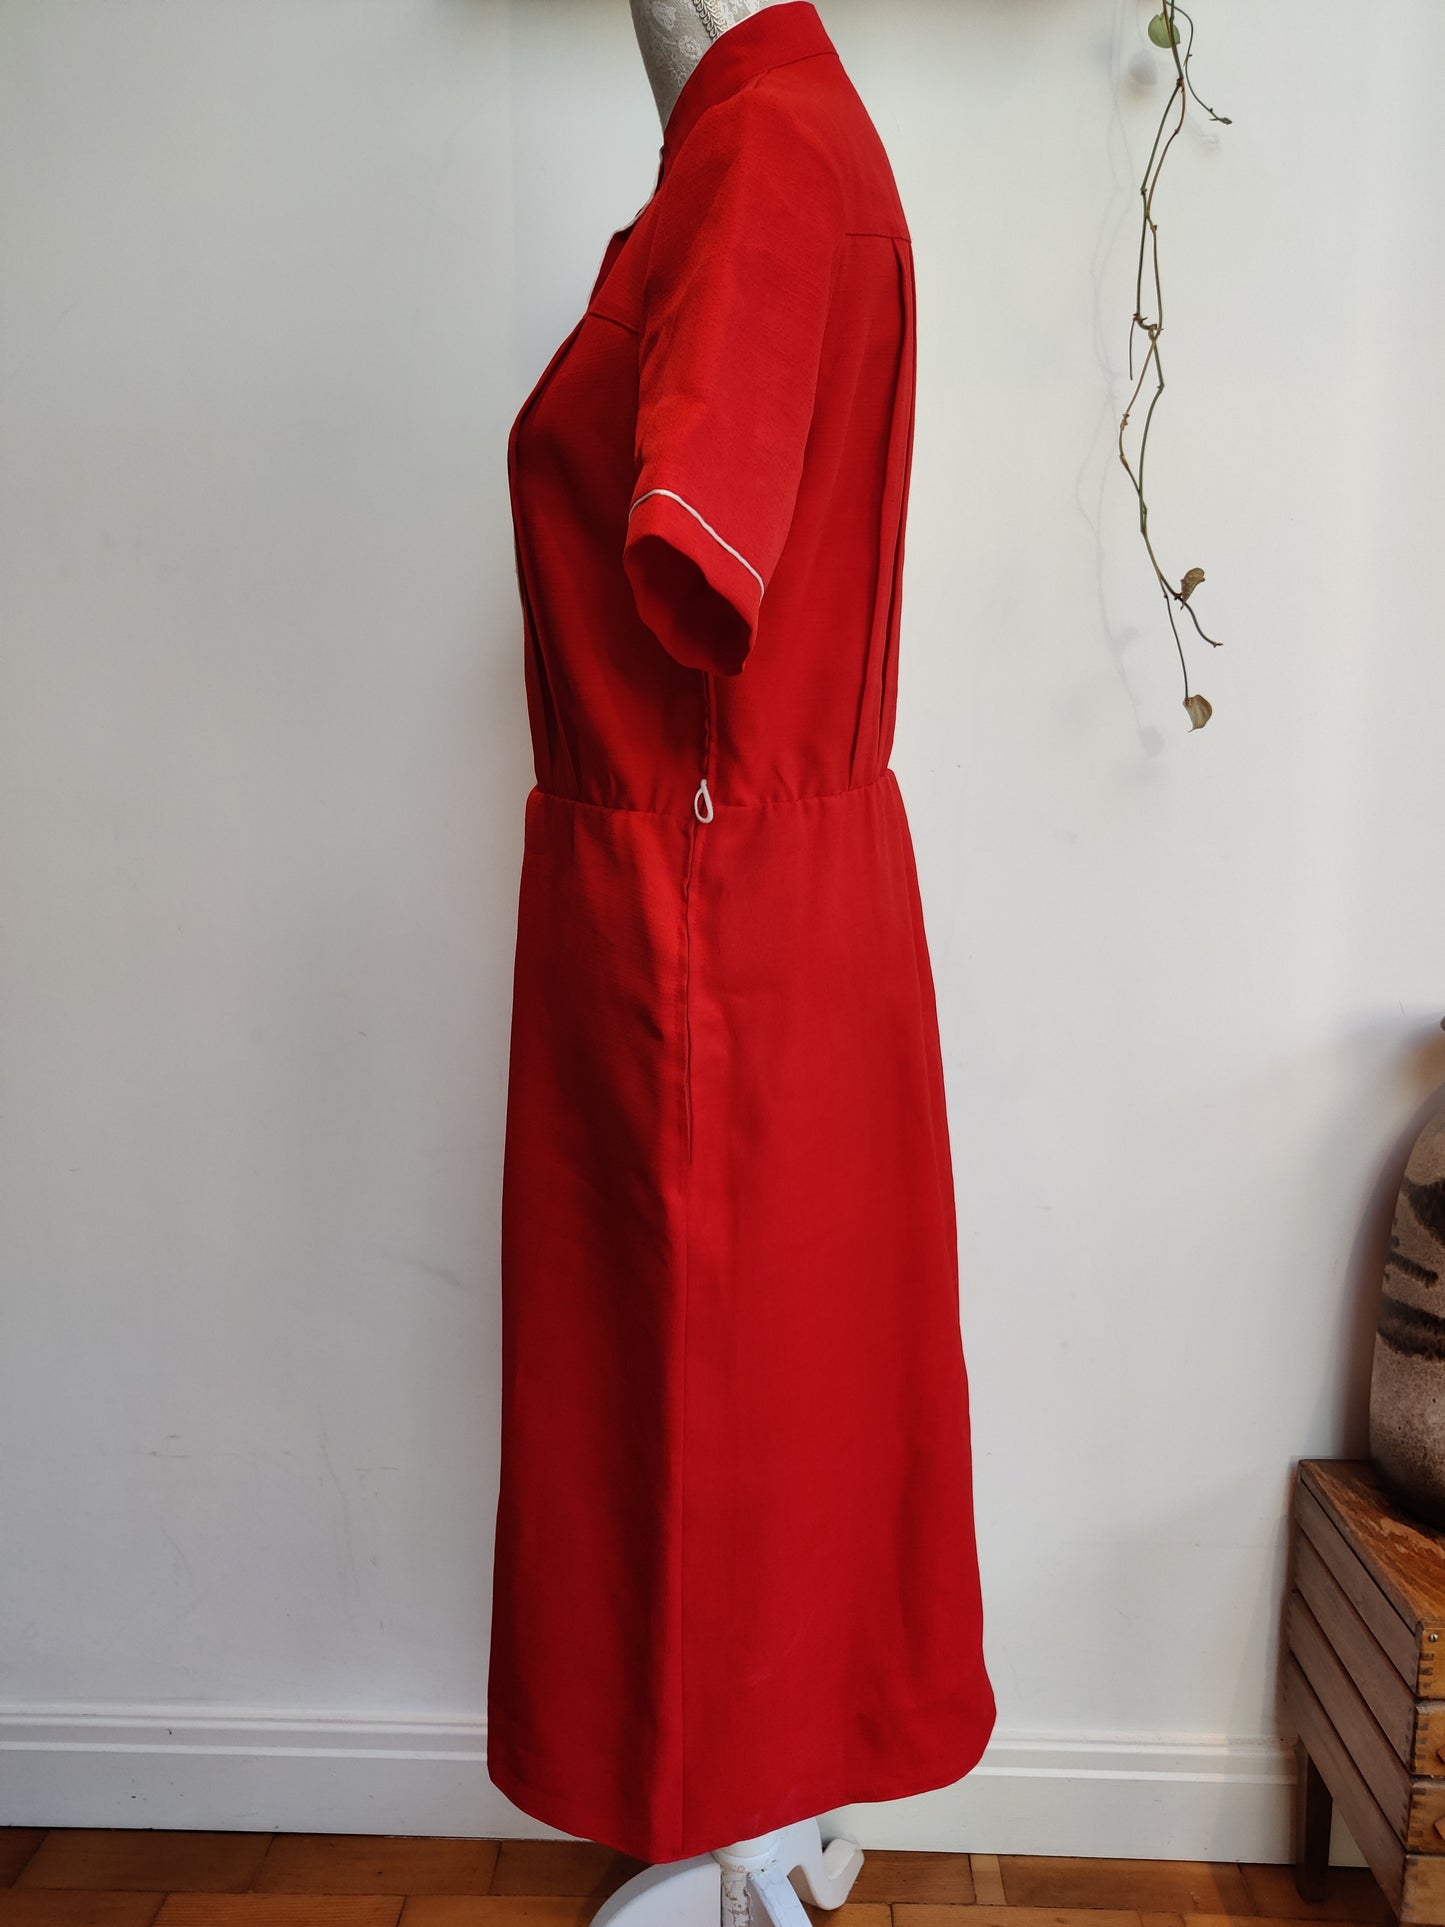 Stunning red 50s style vintage dress. Size 12-14.